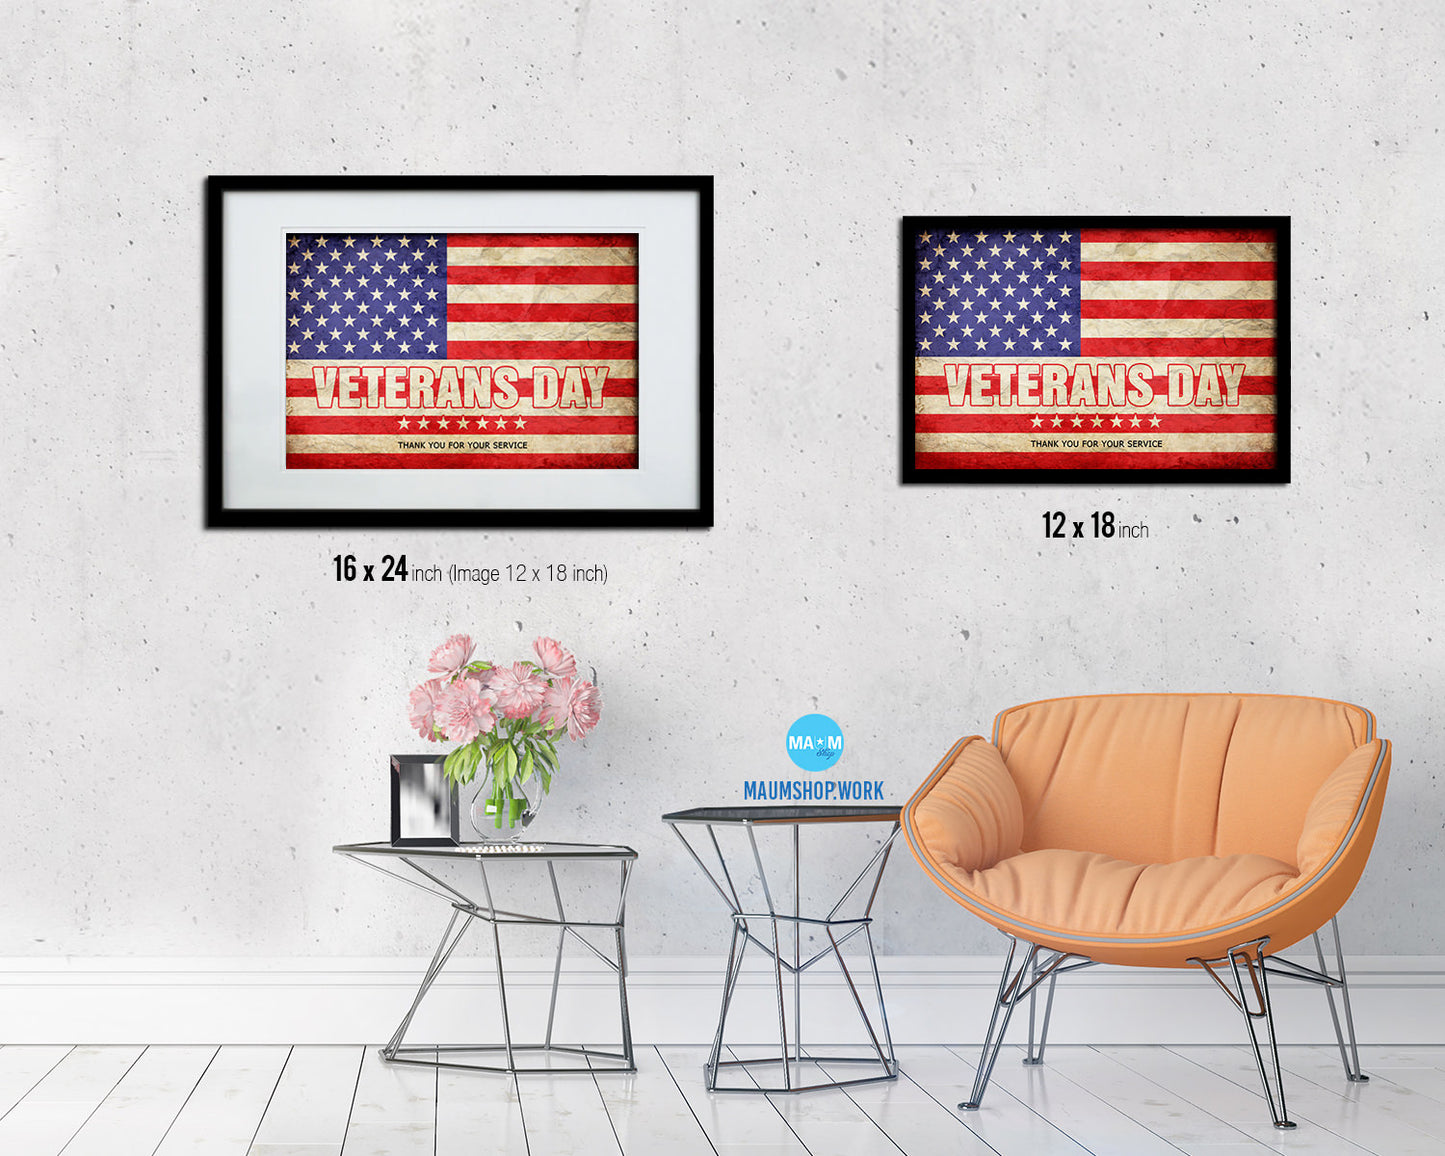 Veterans Day Thank you for your service Vintage Military Flag Framed Print Sign Decor Wall Art Gifts